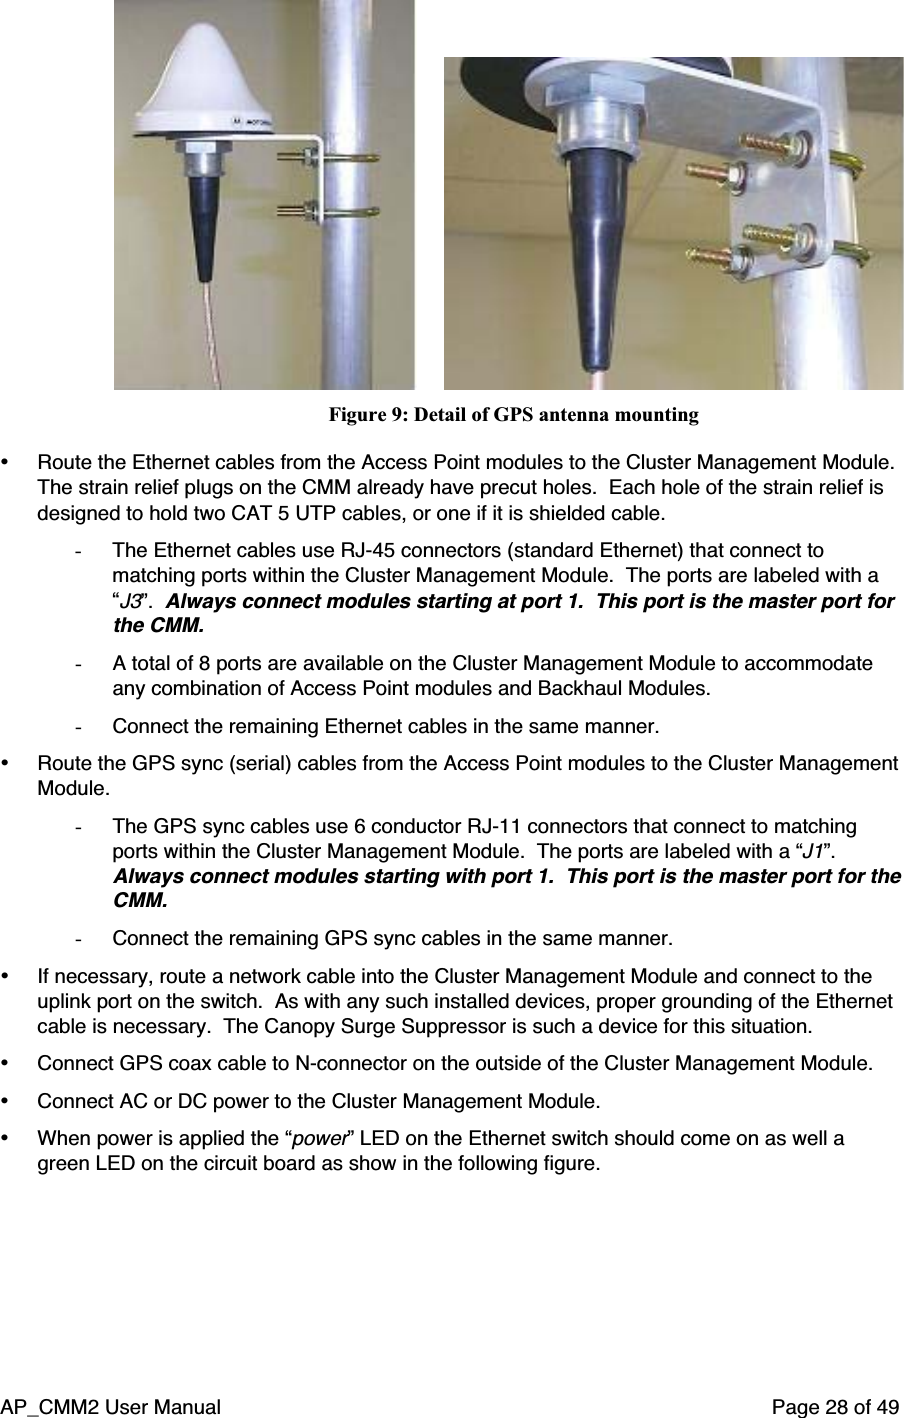 AP_CMM2 User Manual Page 28 of 49                          Figure 9: Detail of GPS antenna mounting• Route the Ethernet cables from the Access Point modules to the Cluster Management Module.The strain relief plugs on the CMM already have precut holes.  Each hole of the strain relief isdesigned to hold two CAT 5 UTP cables, or one if it is shielded cable.- The Ethernet cables use RJ-45 connectors (standard Ethernet) that connect tomatching ports within the Cluster Management Module.  The ports are labeled with a“J3”.  Always connect modules starting at port 1.  This port is the master port forthe CMM.- A total of 8 ports are available on the Cluster Management Module to accommodateany combination of Access Point modules and Backhaul Modules.- Connect the remaining Ethernet cables in the same manner.• Route the GPS sync (serial) cables from the Access Point modules to the Cluster ManagementModule.- The GPS sync cables use 6 conductor RJ-11 connectors that connect to matchingports within the Cluster Management Module.  The ports are labeled with a “J1”.Always connect modules starting with port 1.  This port is the master port for theCMM.- Connect the remaining GPS sync cables in the same manner.• If necessary, route a network cable into the Cluster Management Module and connect to theuplink port on the switch.  As with any such installed devices, proper grounding of the Ethernetcable is necessary.  The Canopy Surge Suppressor is such a device for this situation.• Connect GPS coax cable to N-connector on the outside of the Cluster Management Module.• Connect AC or DC power to the Cluster Management Module.• When power is applied the “power” LED on the Ethernet switch should come on as well agreen LED on the circuit board as show in the following figure.